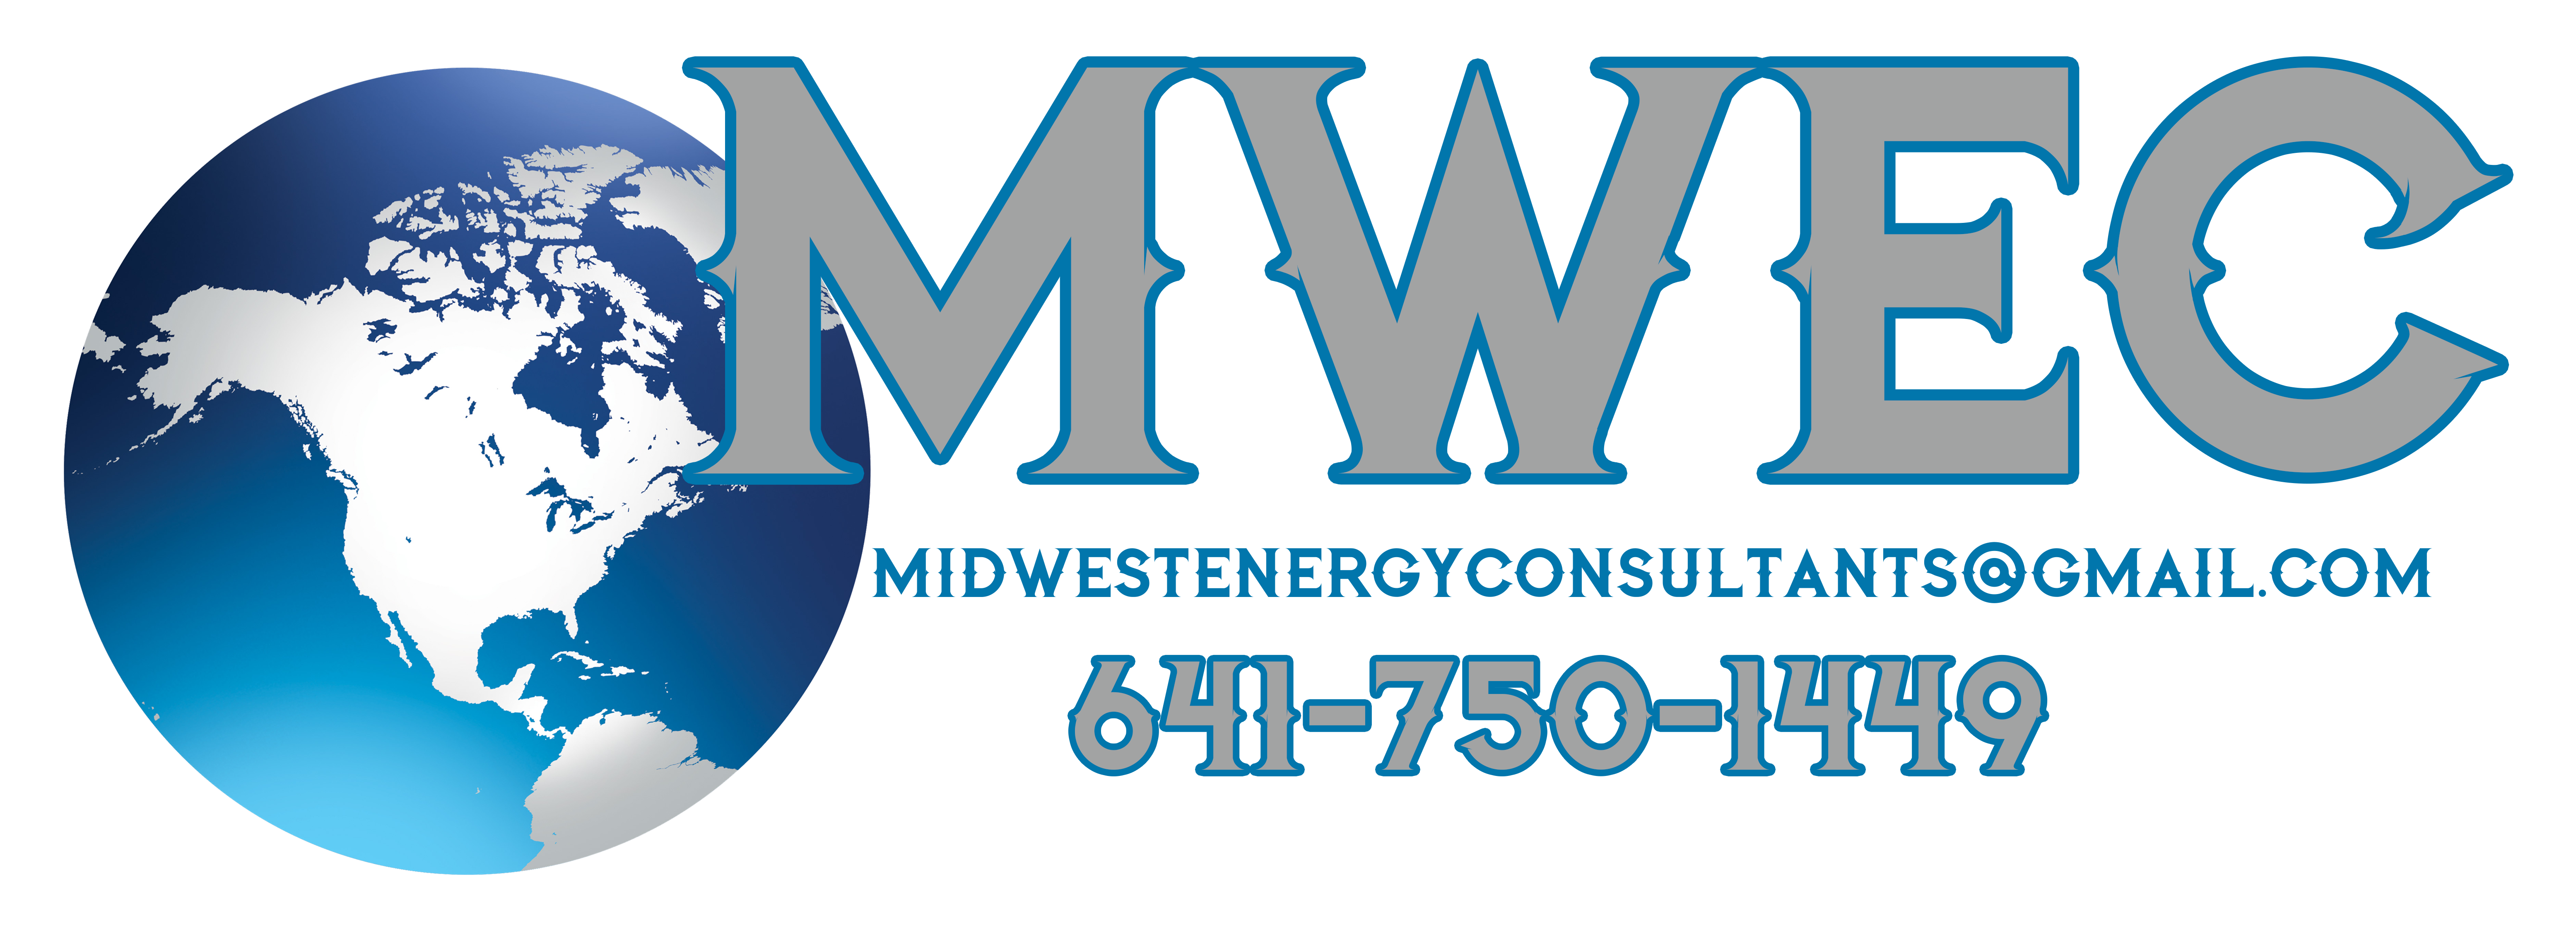 Midwest Energy Consultant LLC company logo